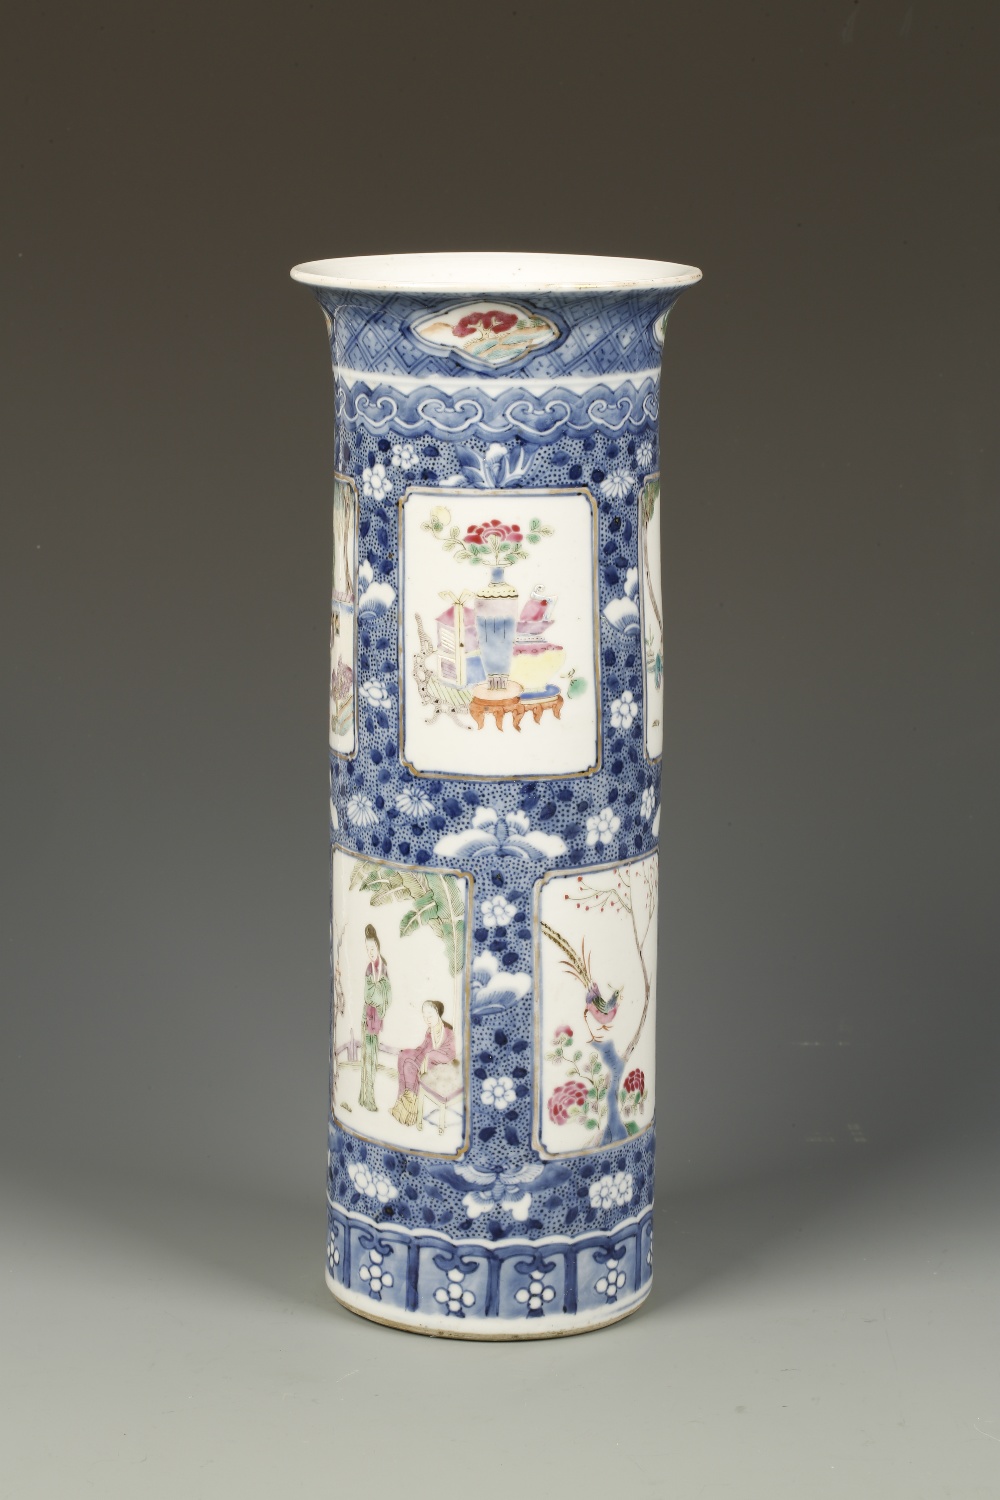 A CHINESE FAMILLE ROSE CYLINDRICAL VASE decorated with rectangular panels showing figures and other